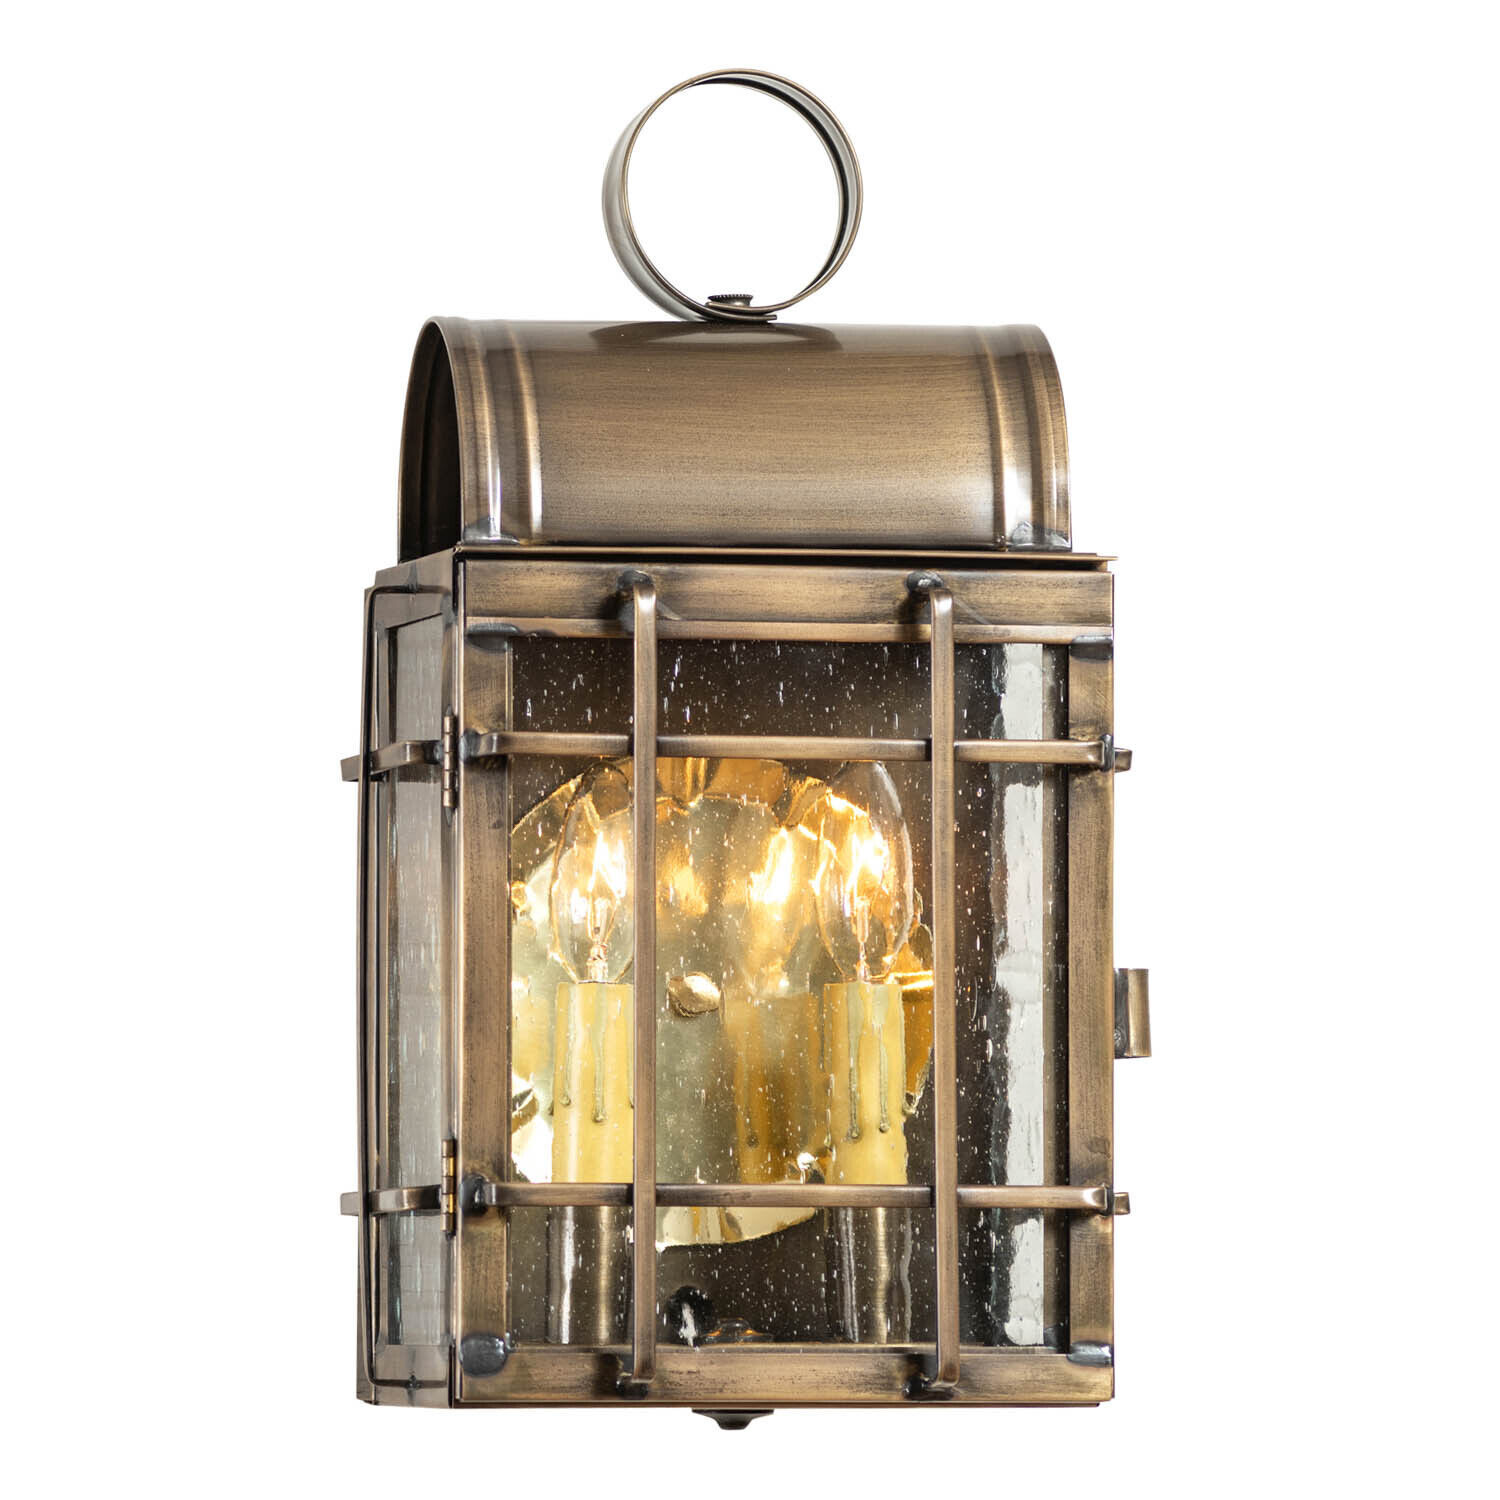 Primary image for Carriage House Outdoor Wall Light in Solid Weathered Brass - 2 Light